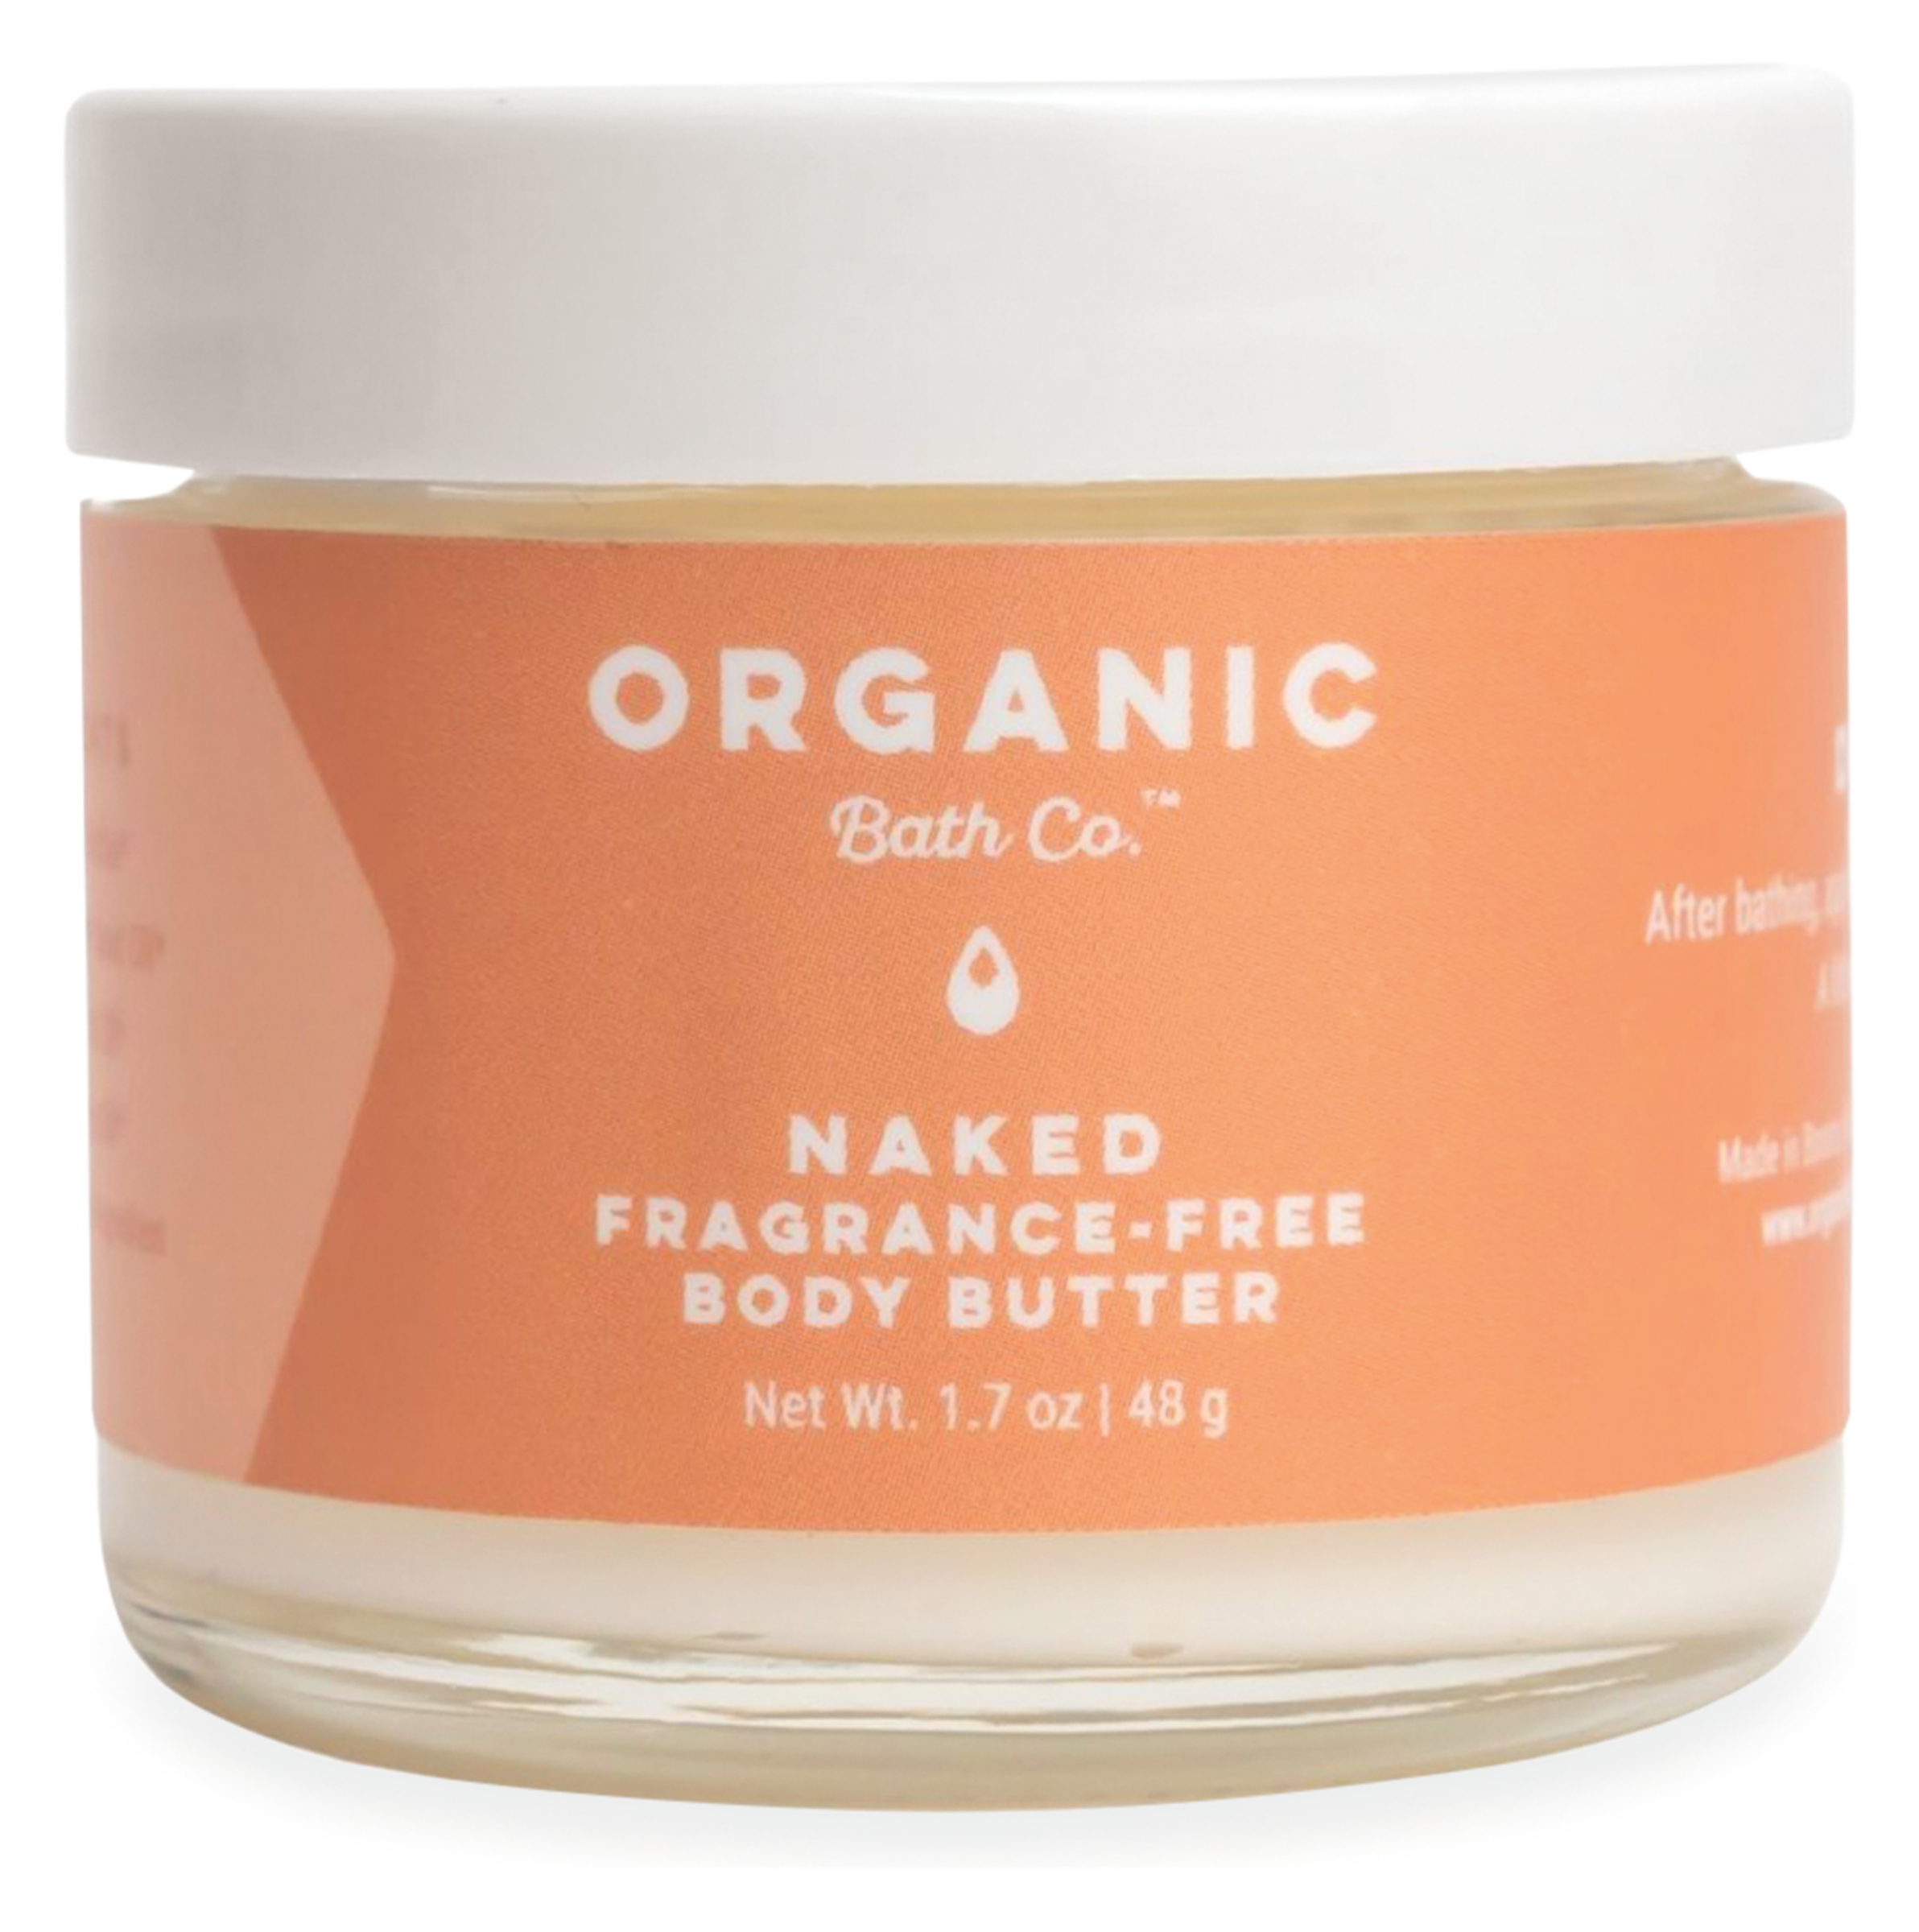 Organic Bath Company - Body Butter 1.7oz in Naked